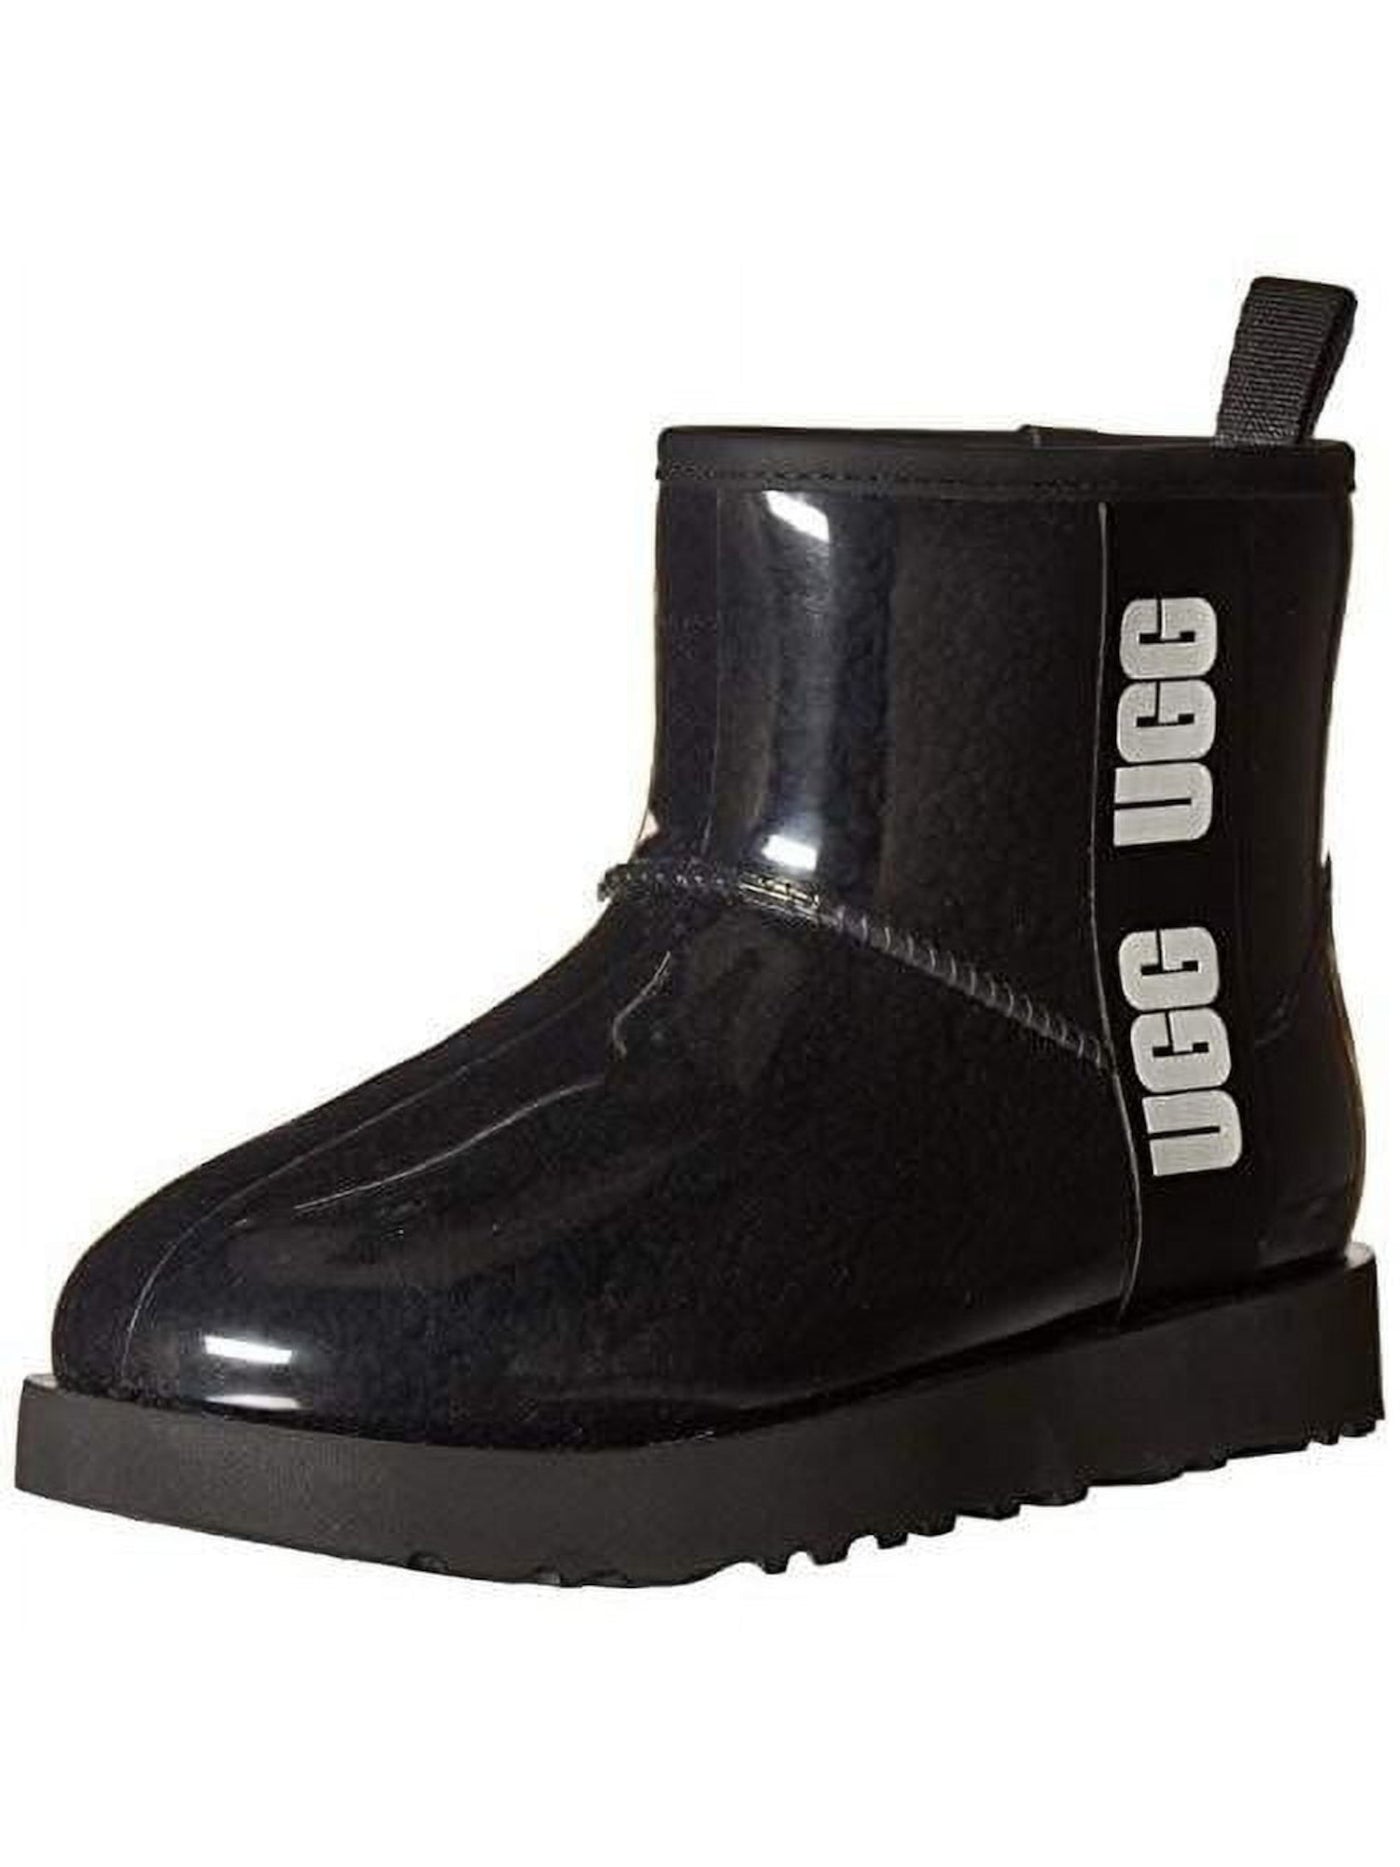 UGG Womens Black Colorblocked Stripe Pull Tab At Heel Padded Classic Round Toe Winter Boots 7